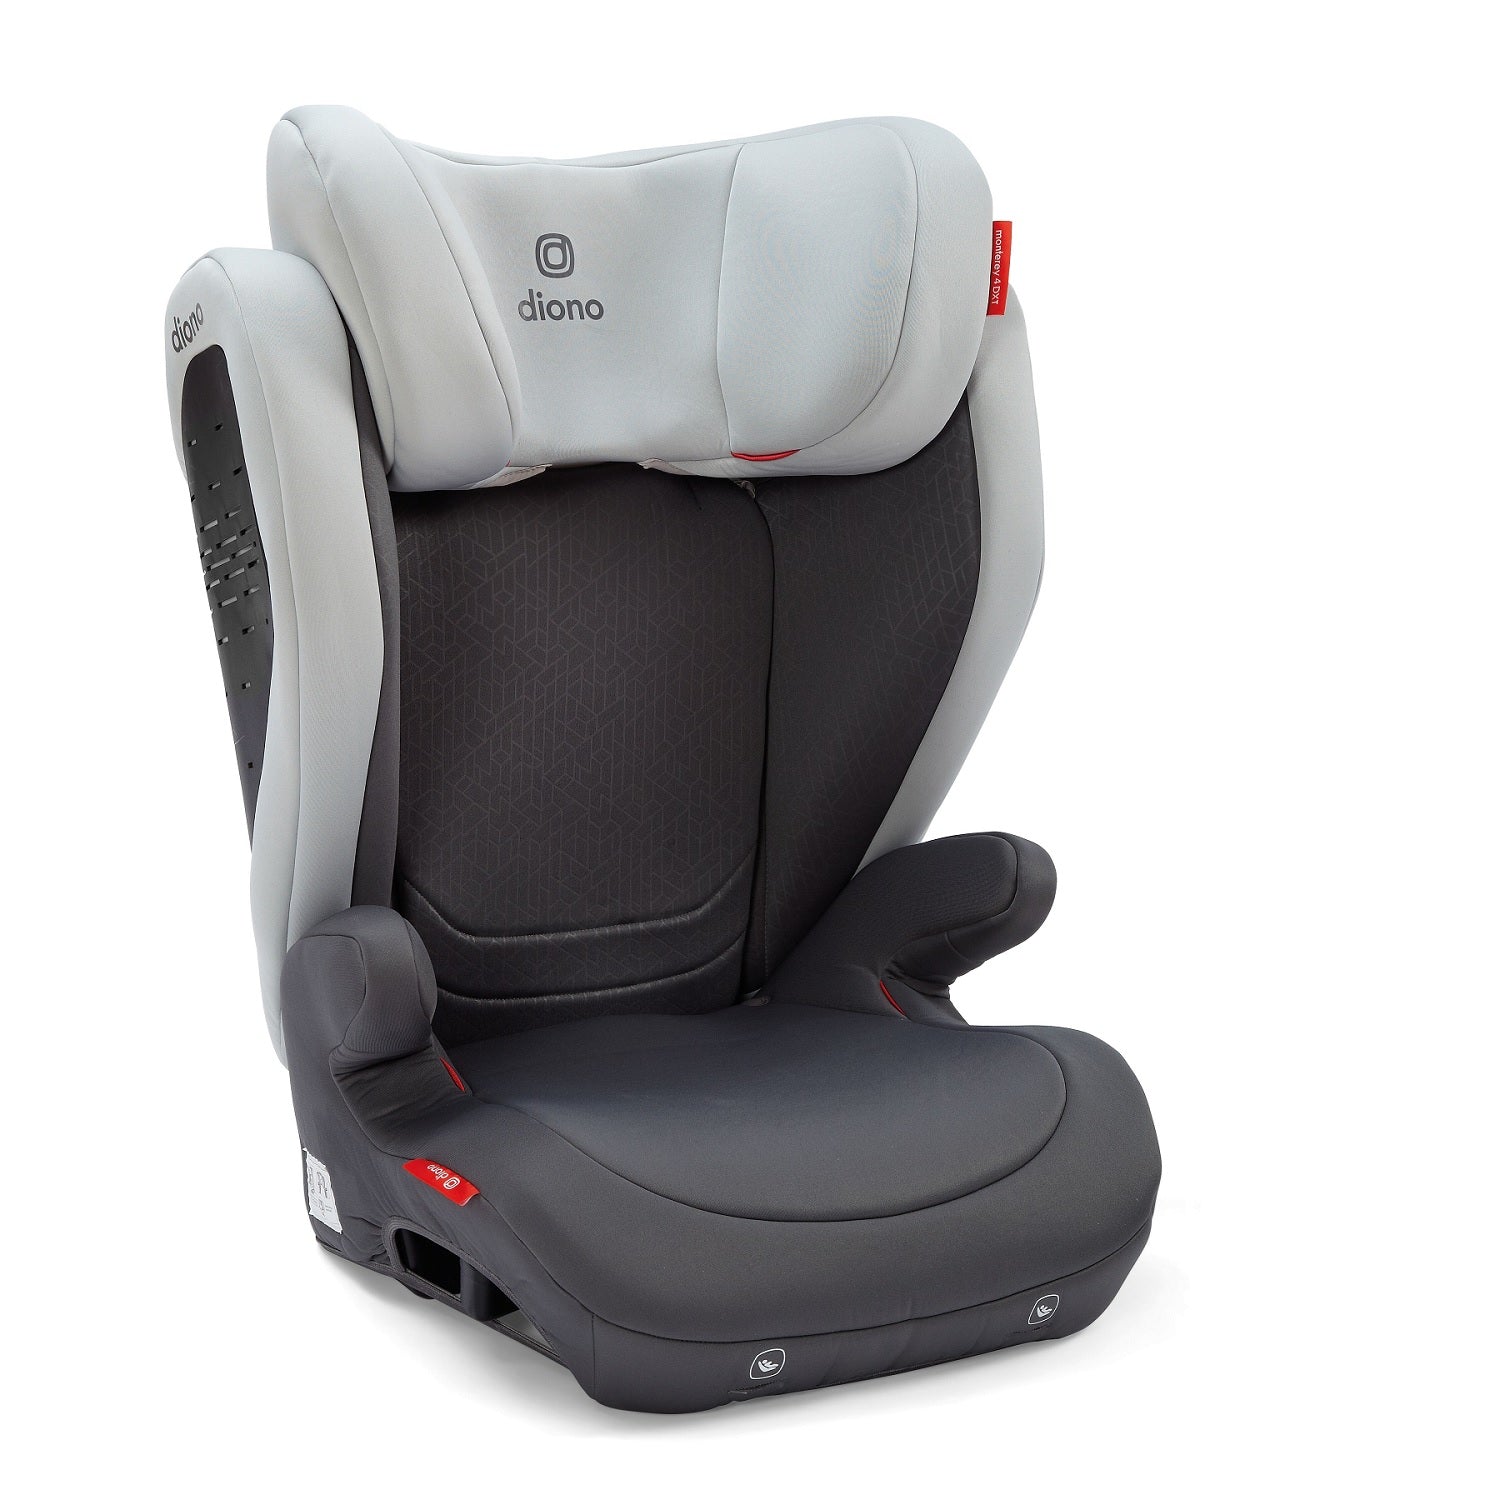 Diono Monterey XT Booster Seat Review - Car Seats For The Littles